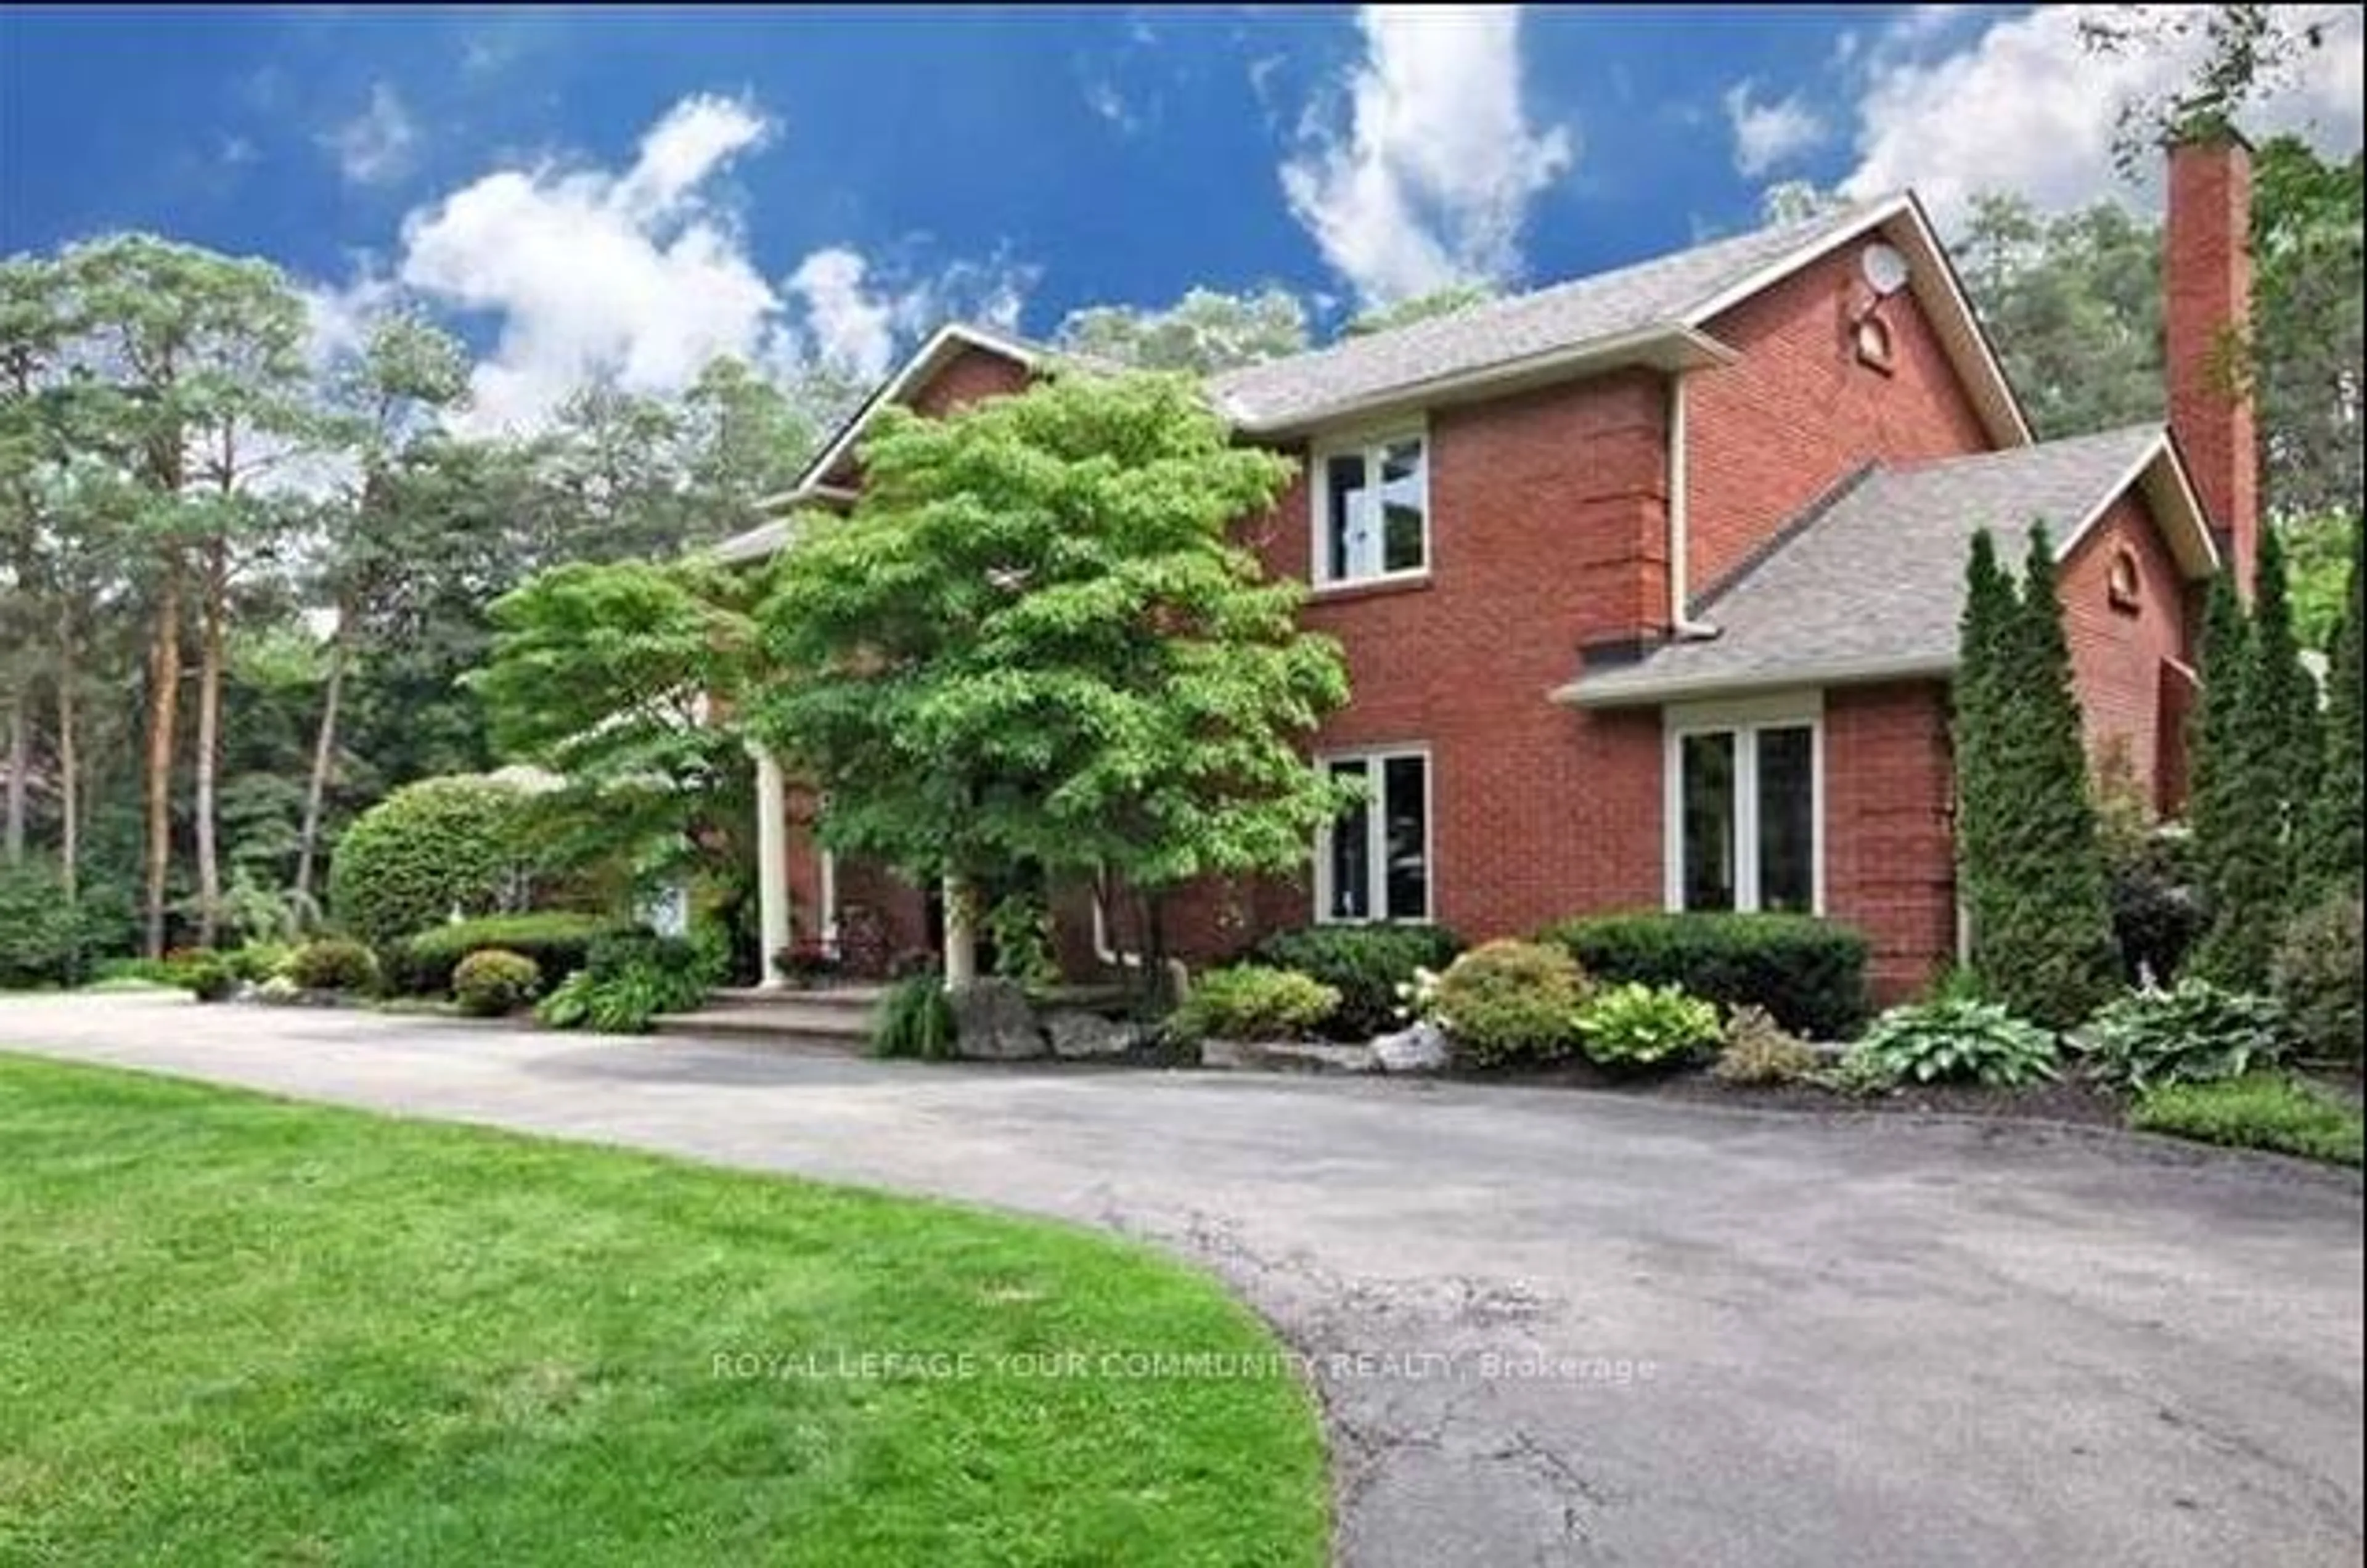 Home with brick exterior material for 52 Beaufort Hills Rd, Richmond Hill Ontario L4E 2N1